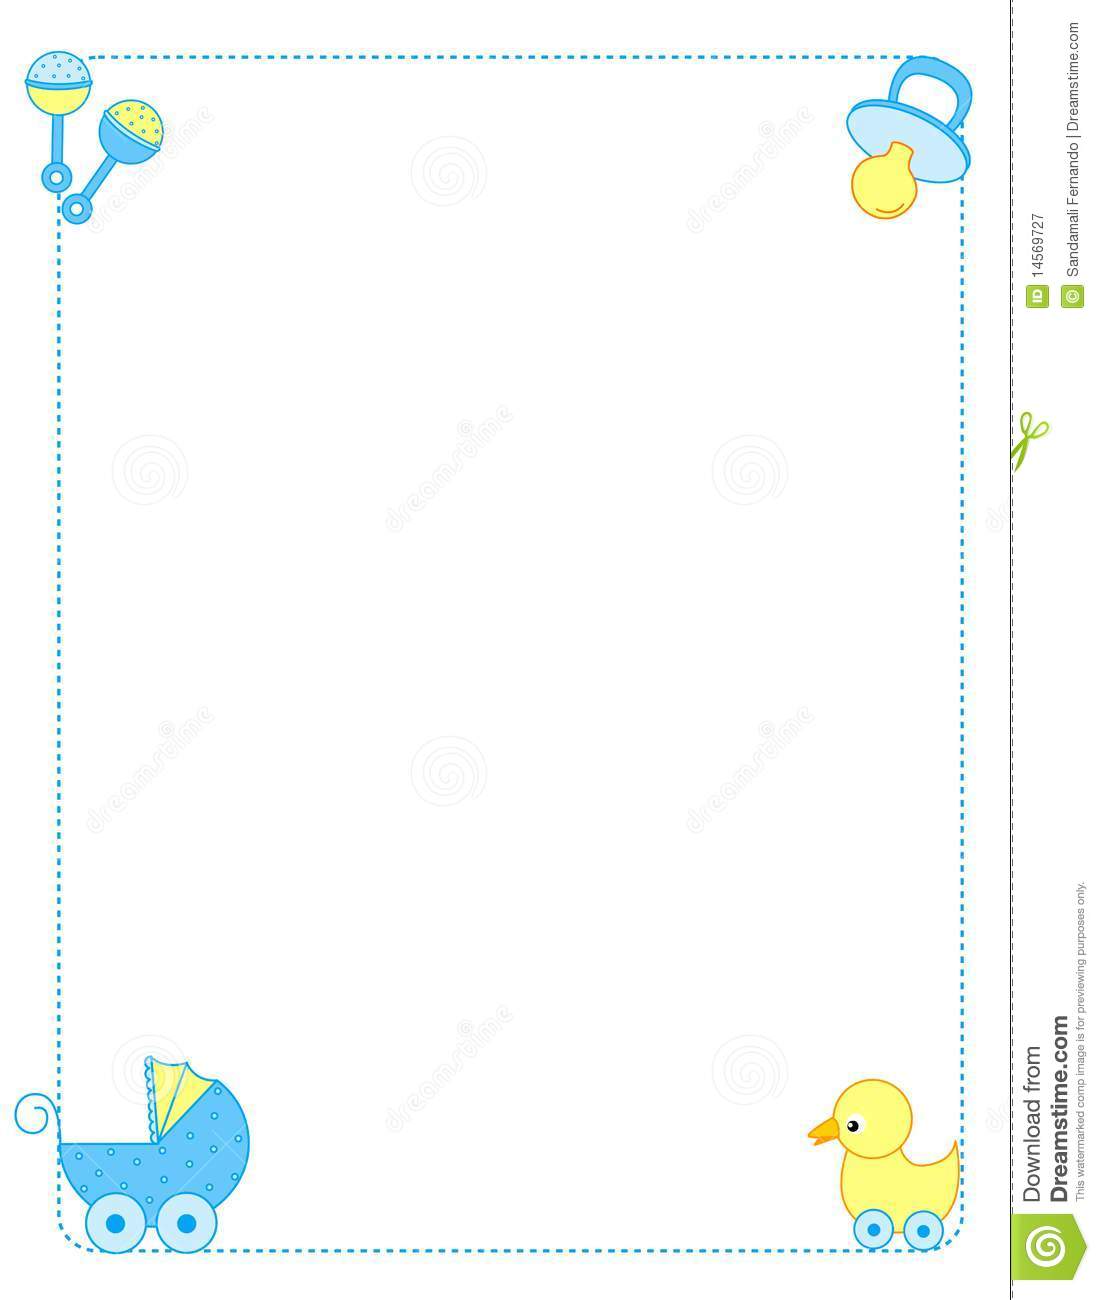 Baby Boy Border Clip Art Images   Pictures   Becuo